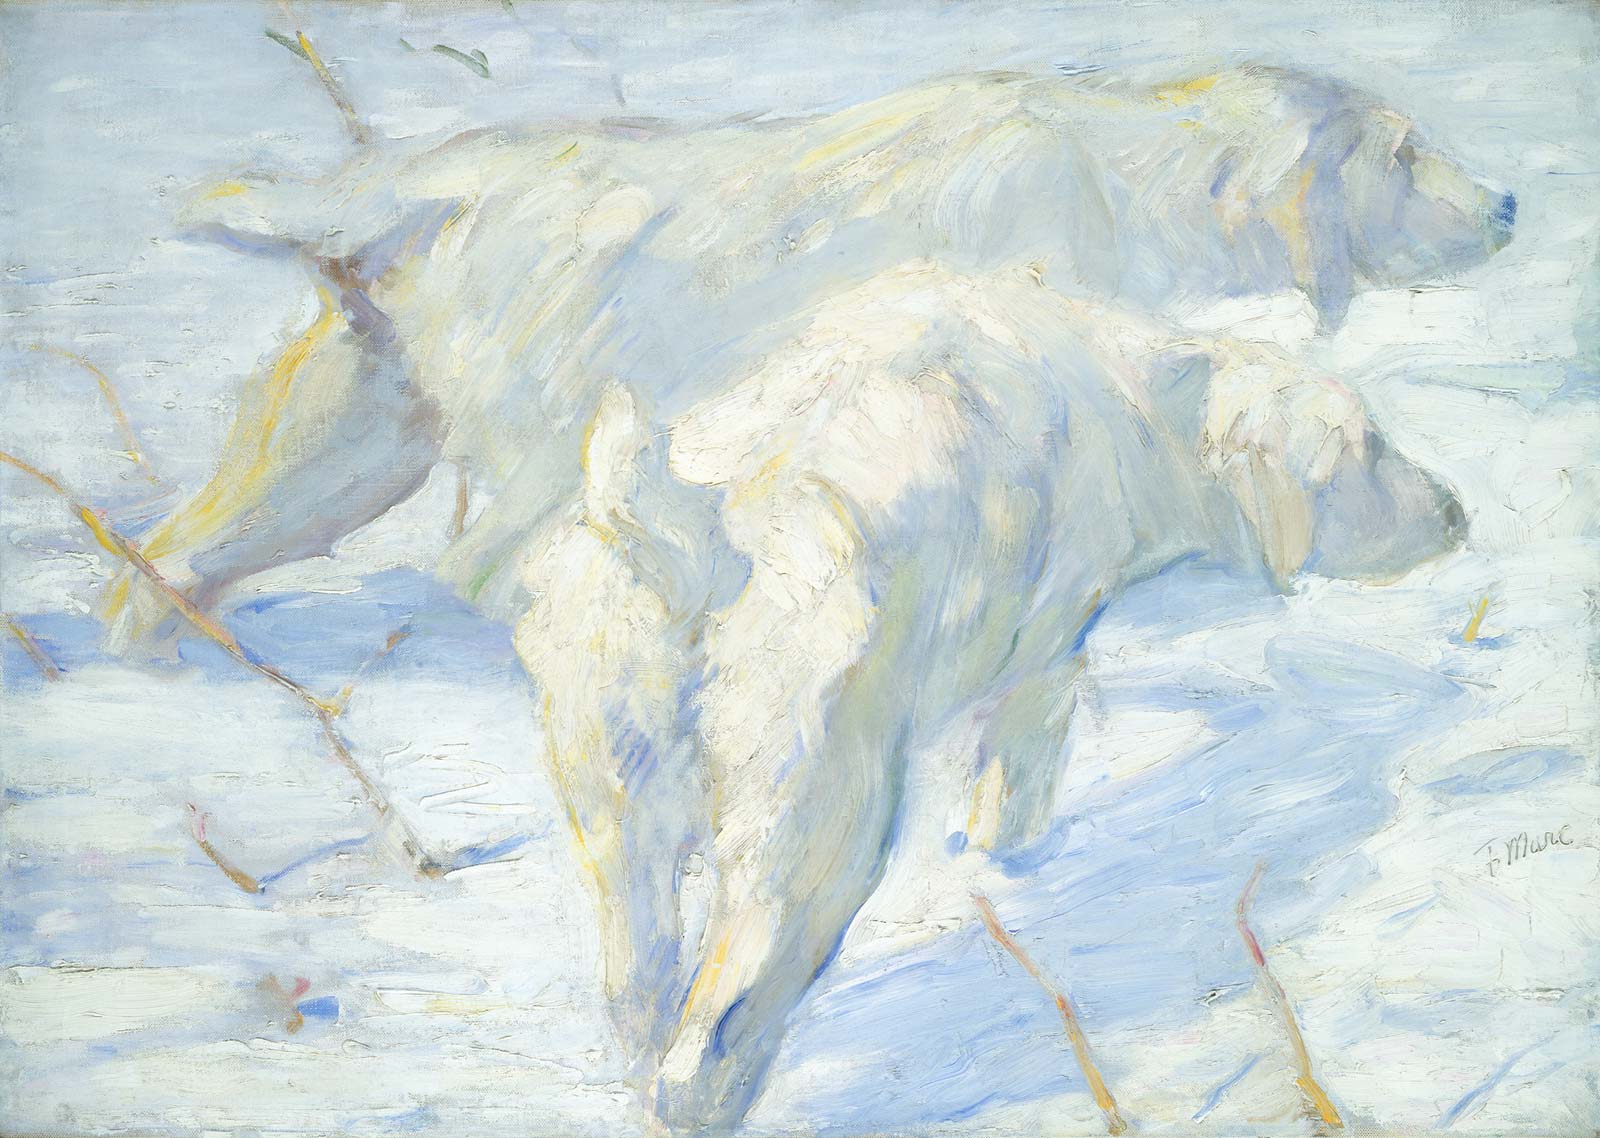 Siberian Dogs in the Snow by Franz Marc - 1909/1910 - 80.5 × 114 cm National Gallery of Art